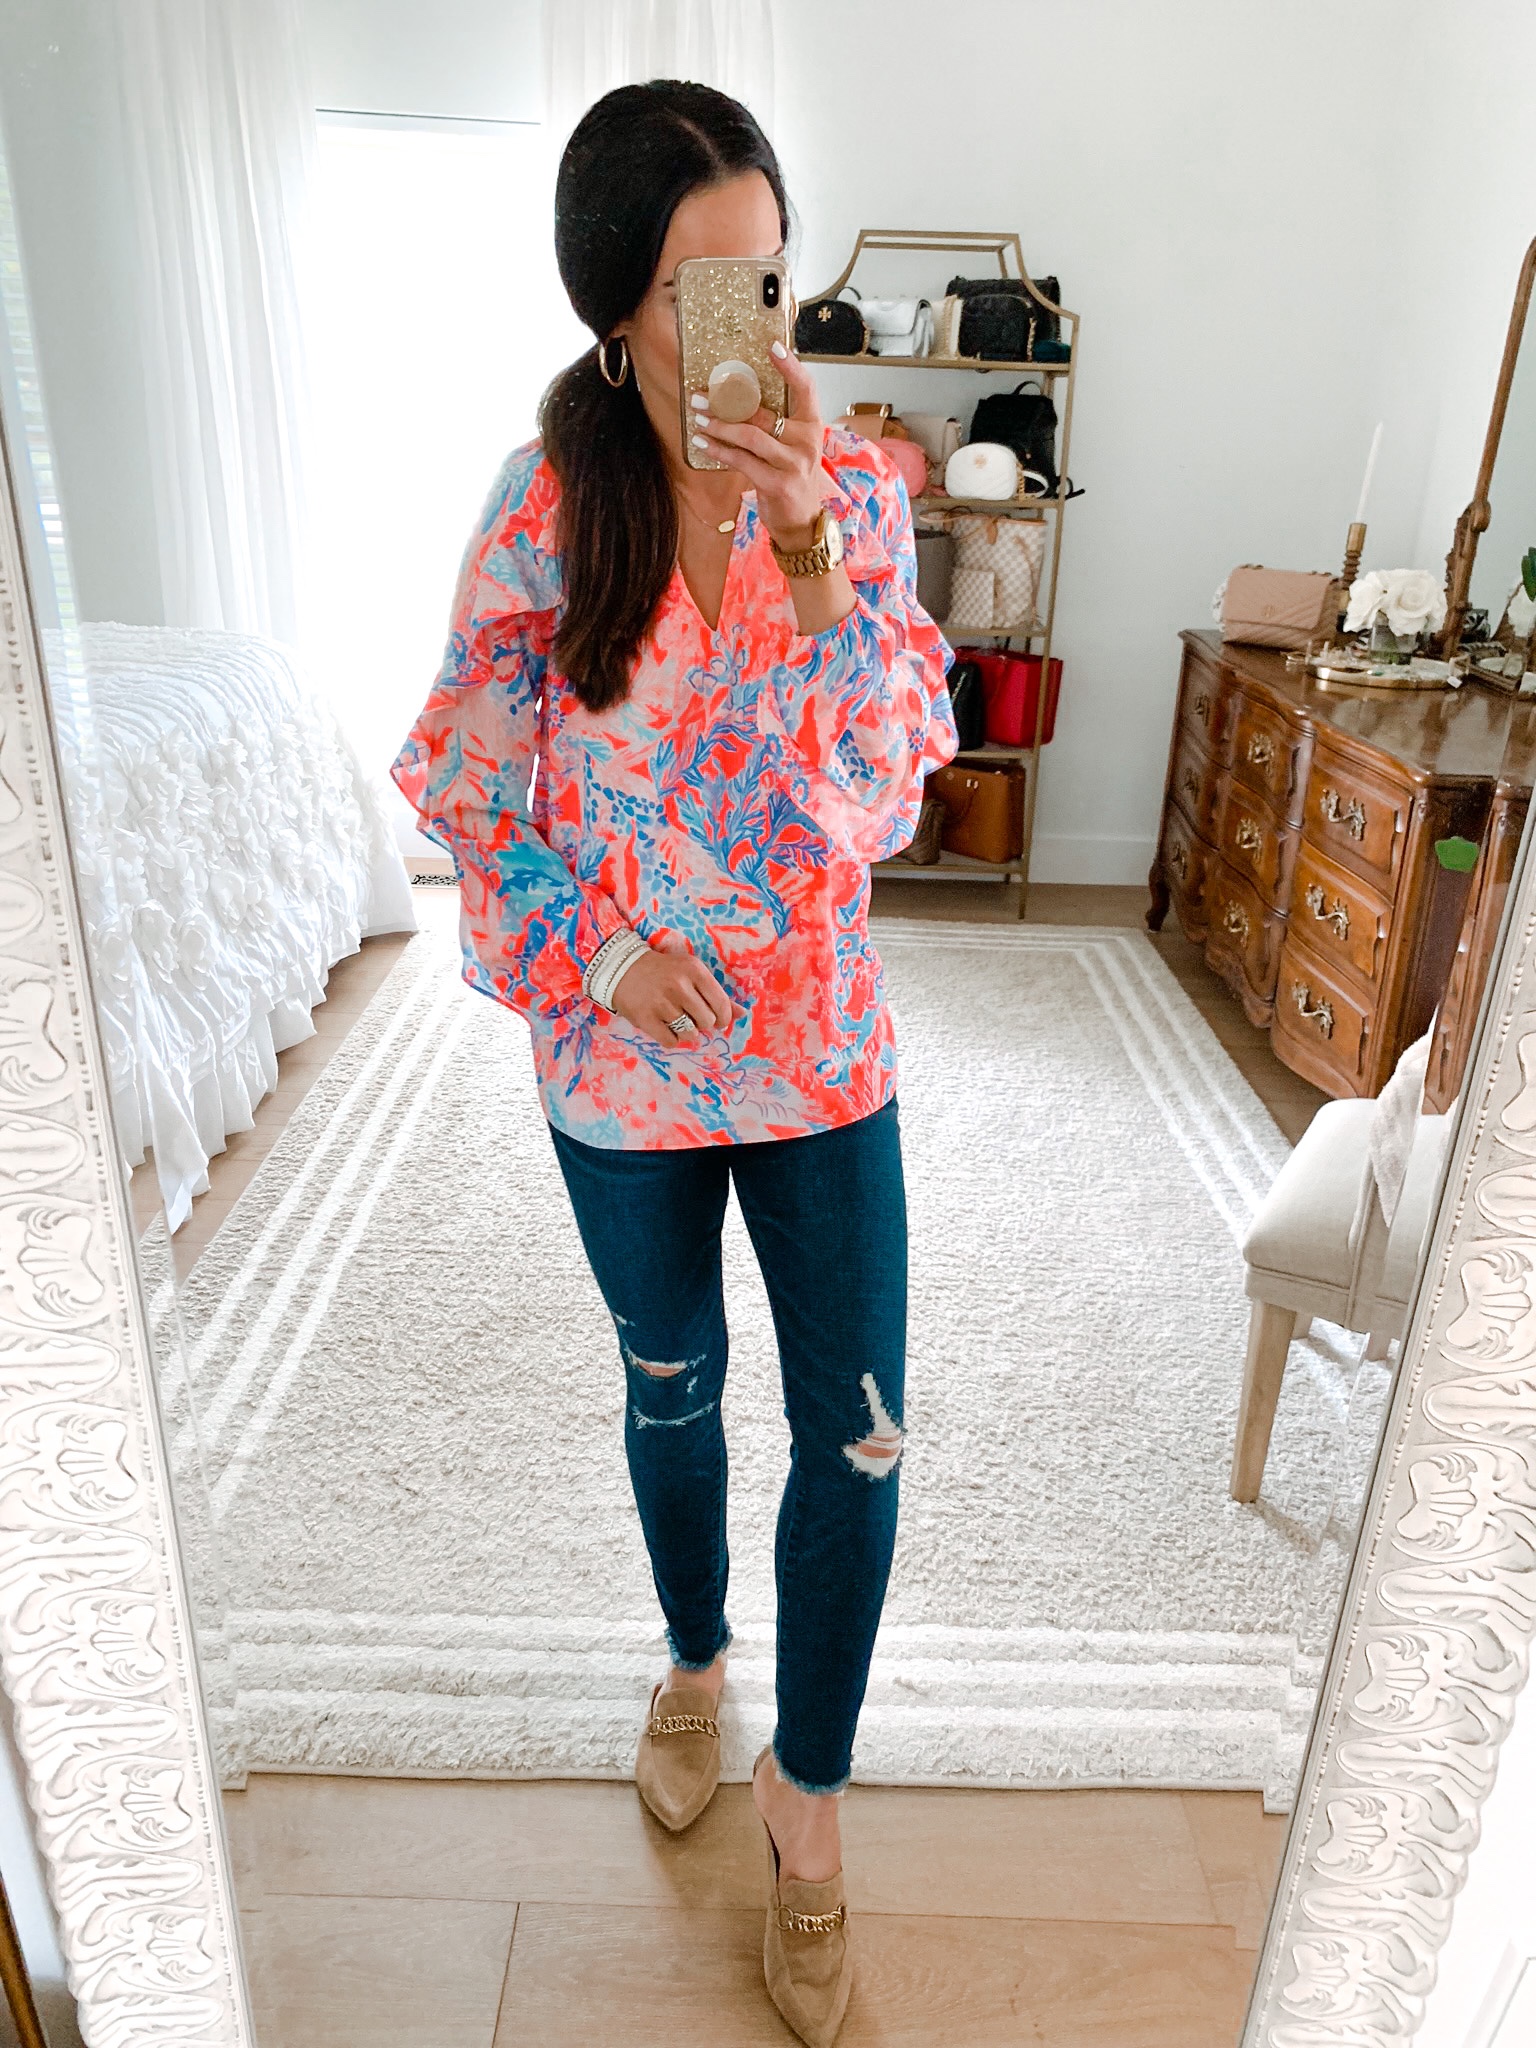 The Lilly Pulitzer After Party Sale 2021 Is Live!! - The Double Take Girls